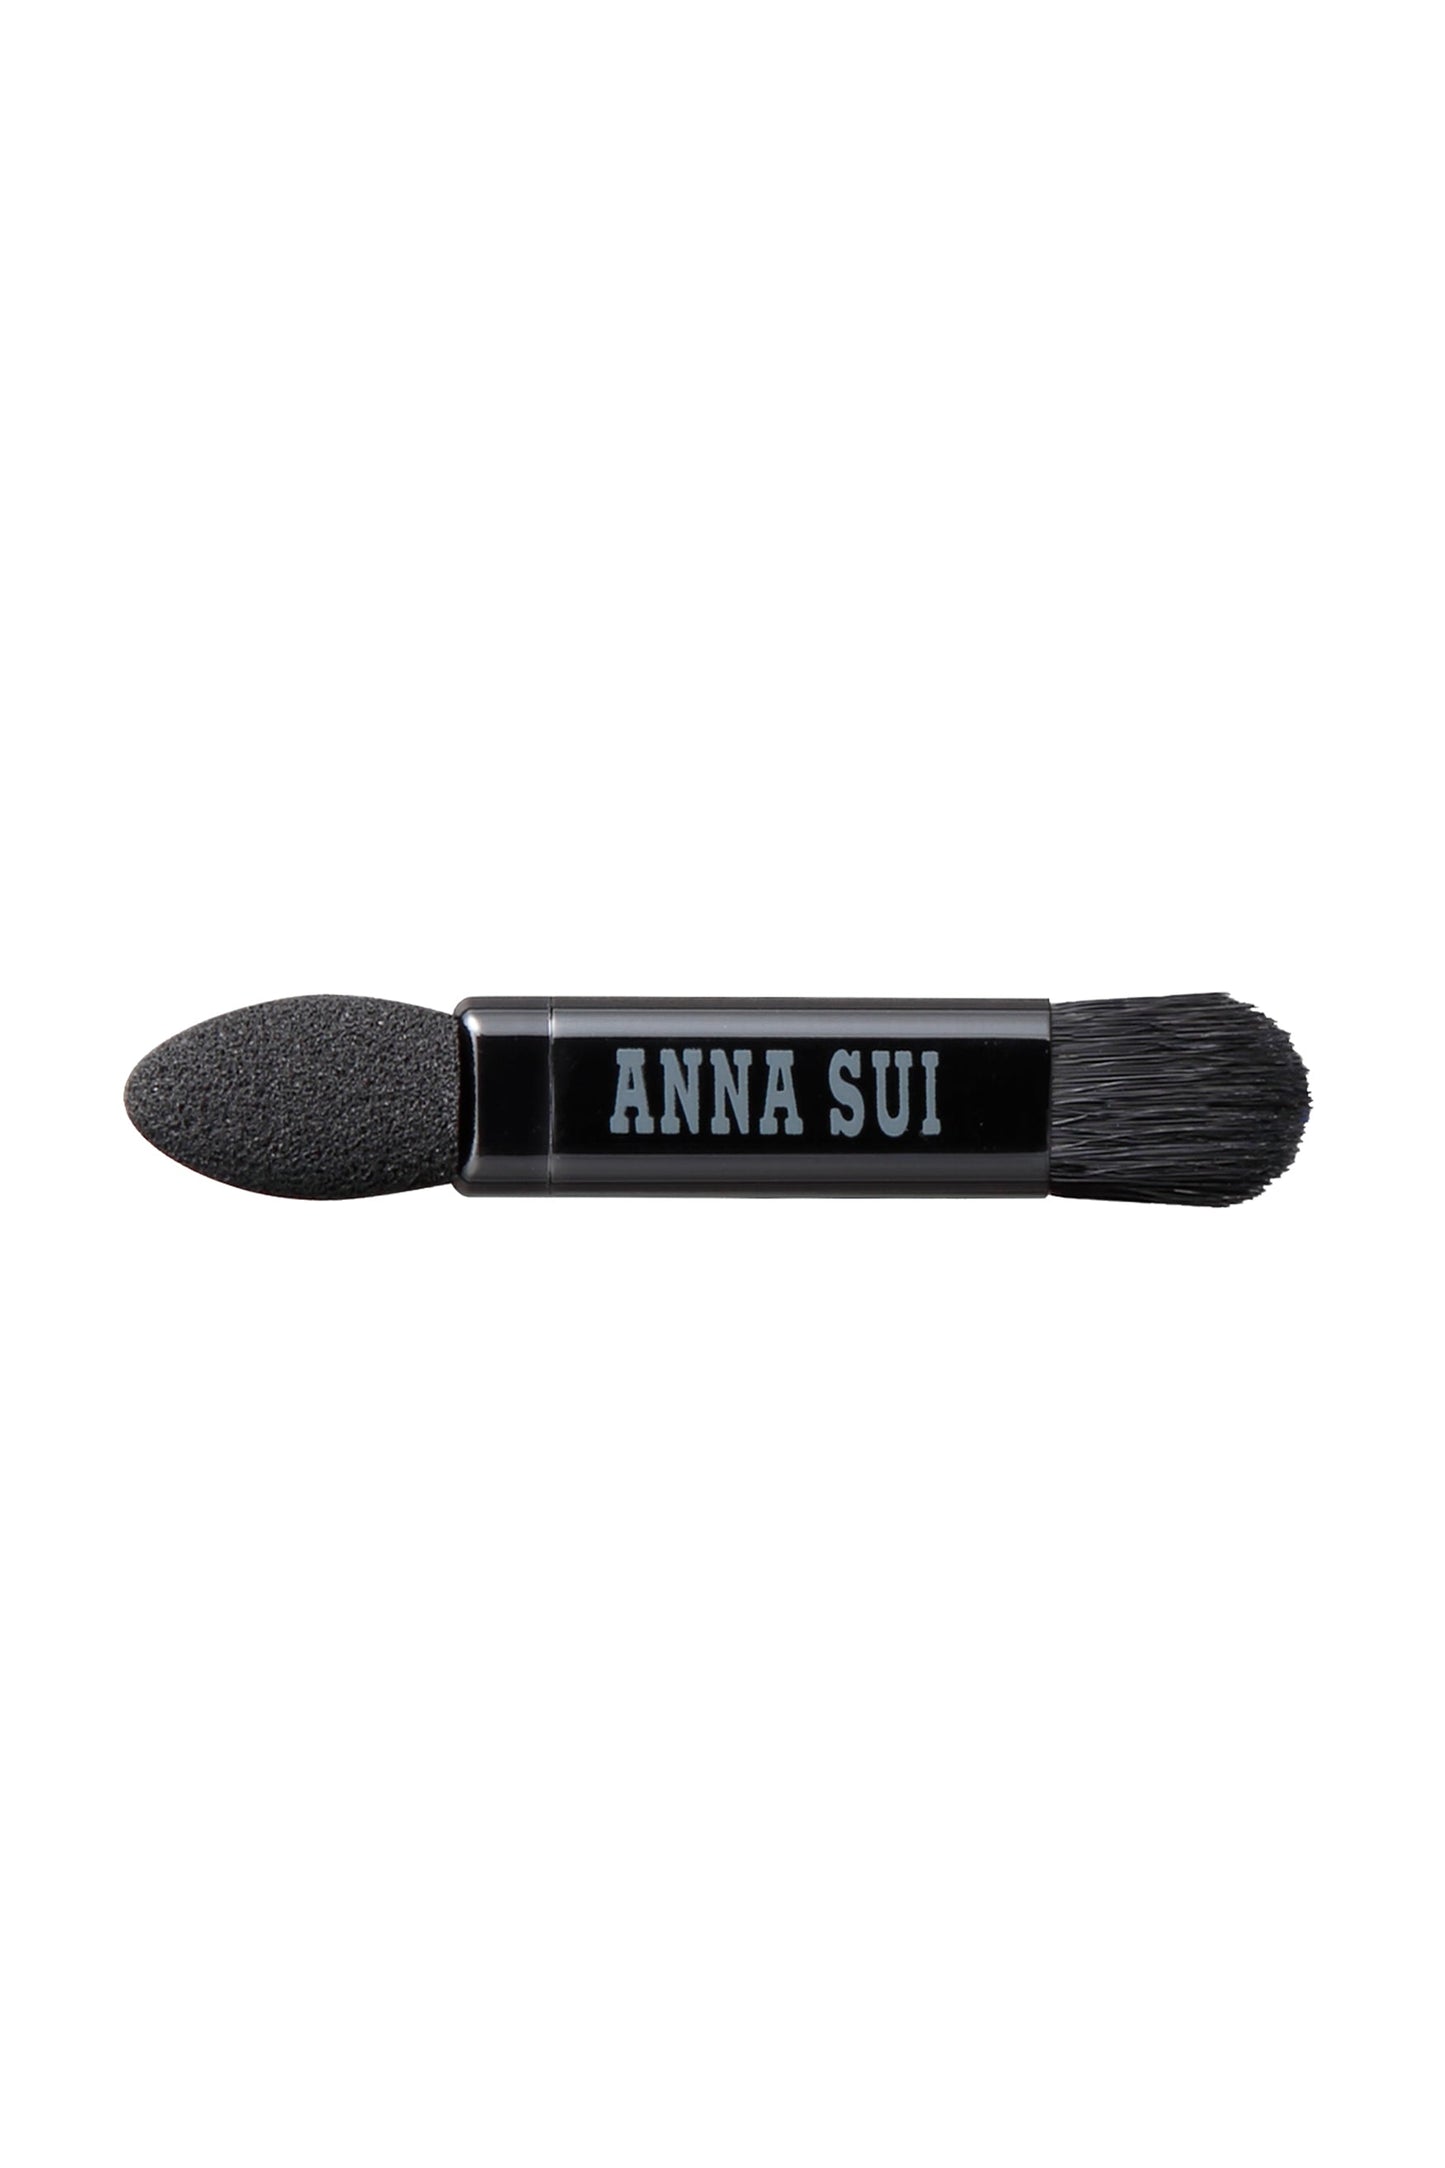 The applicator, a hard head on one side, a Bruch on the other, Anna Sui label on the middle of it